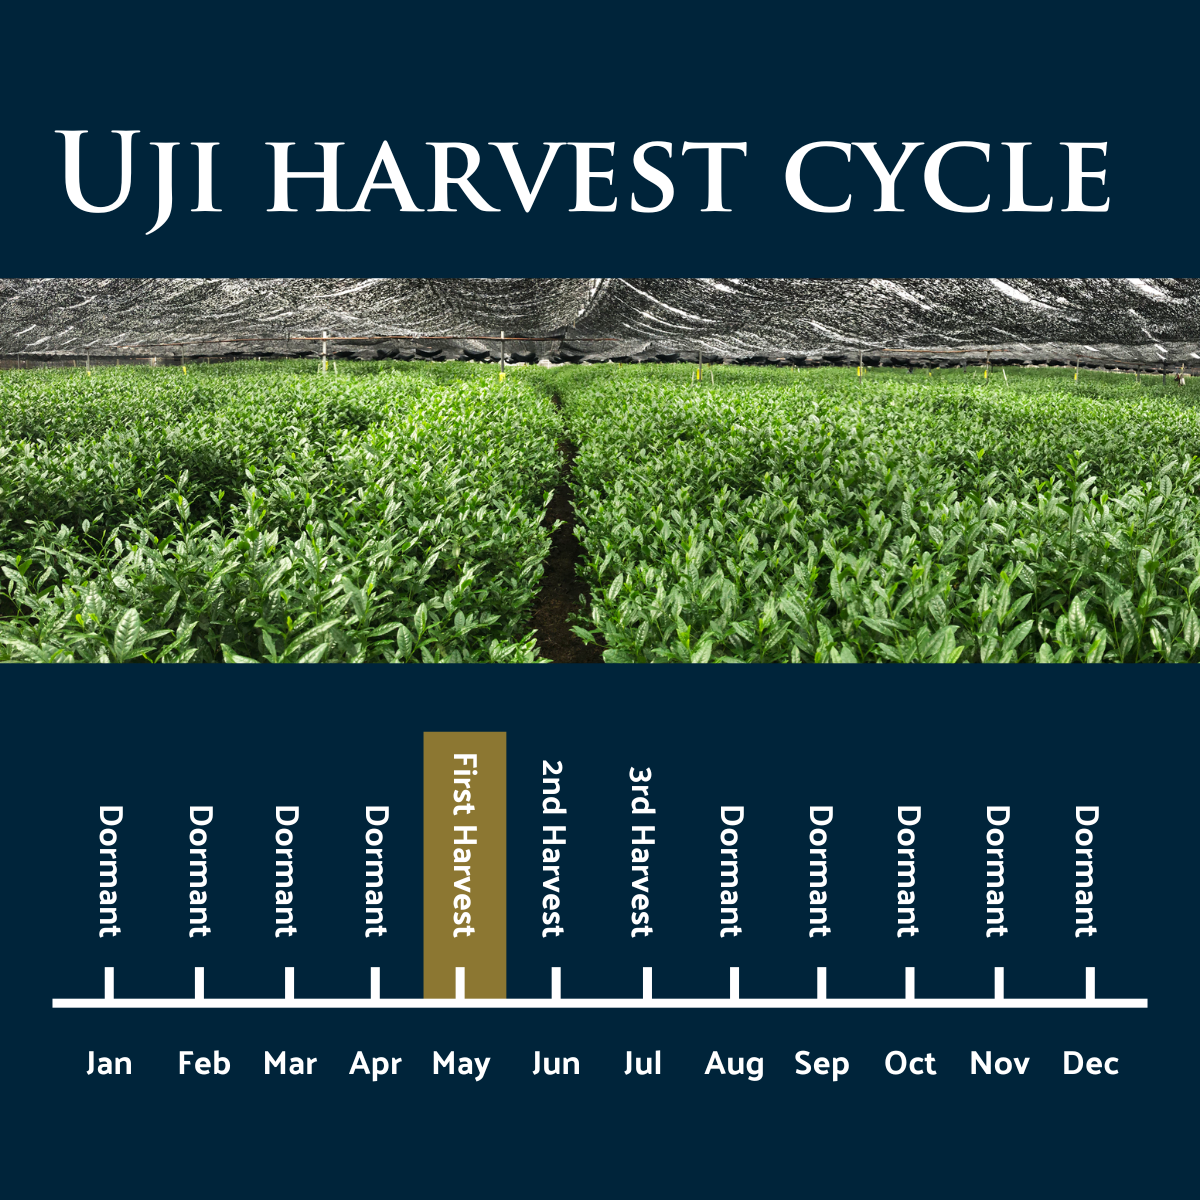 Matcha tea plants with diagram showing the tea harvest cycle